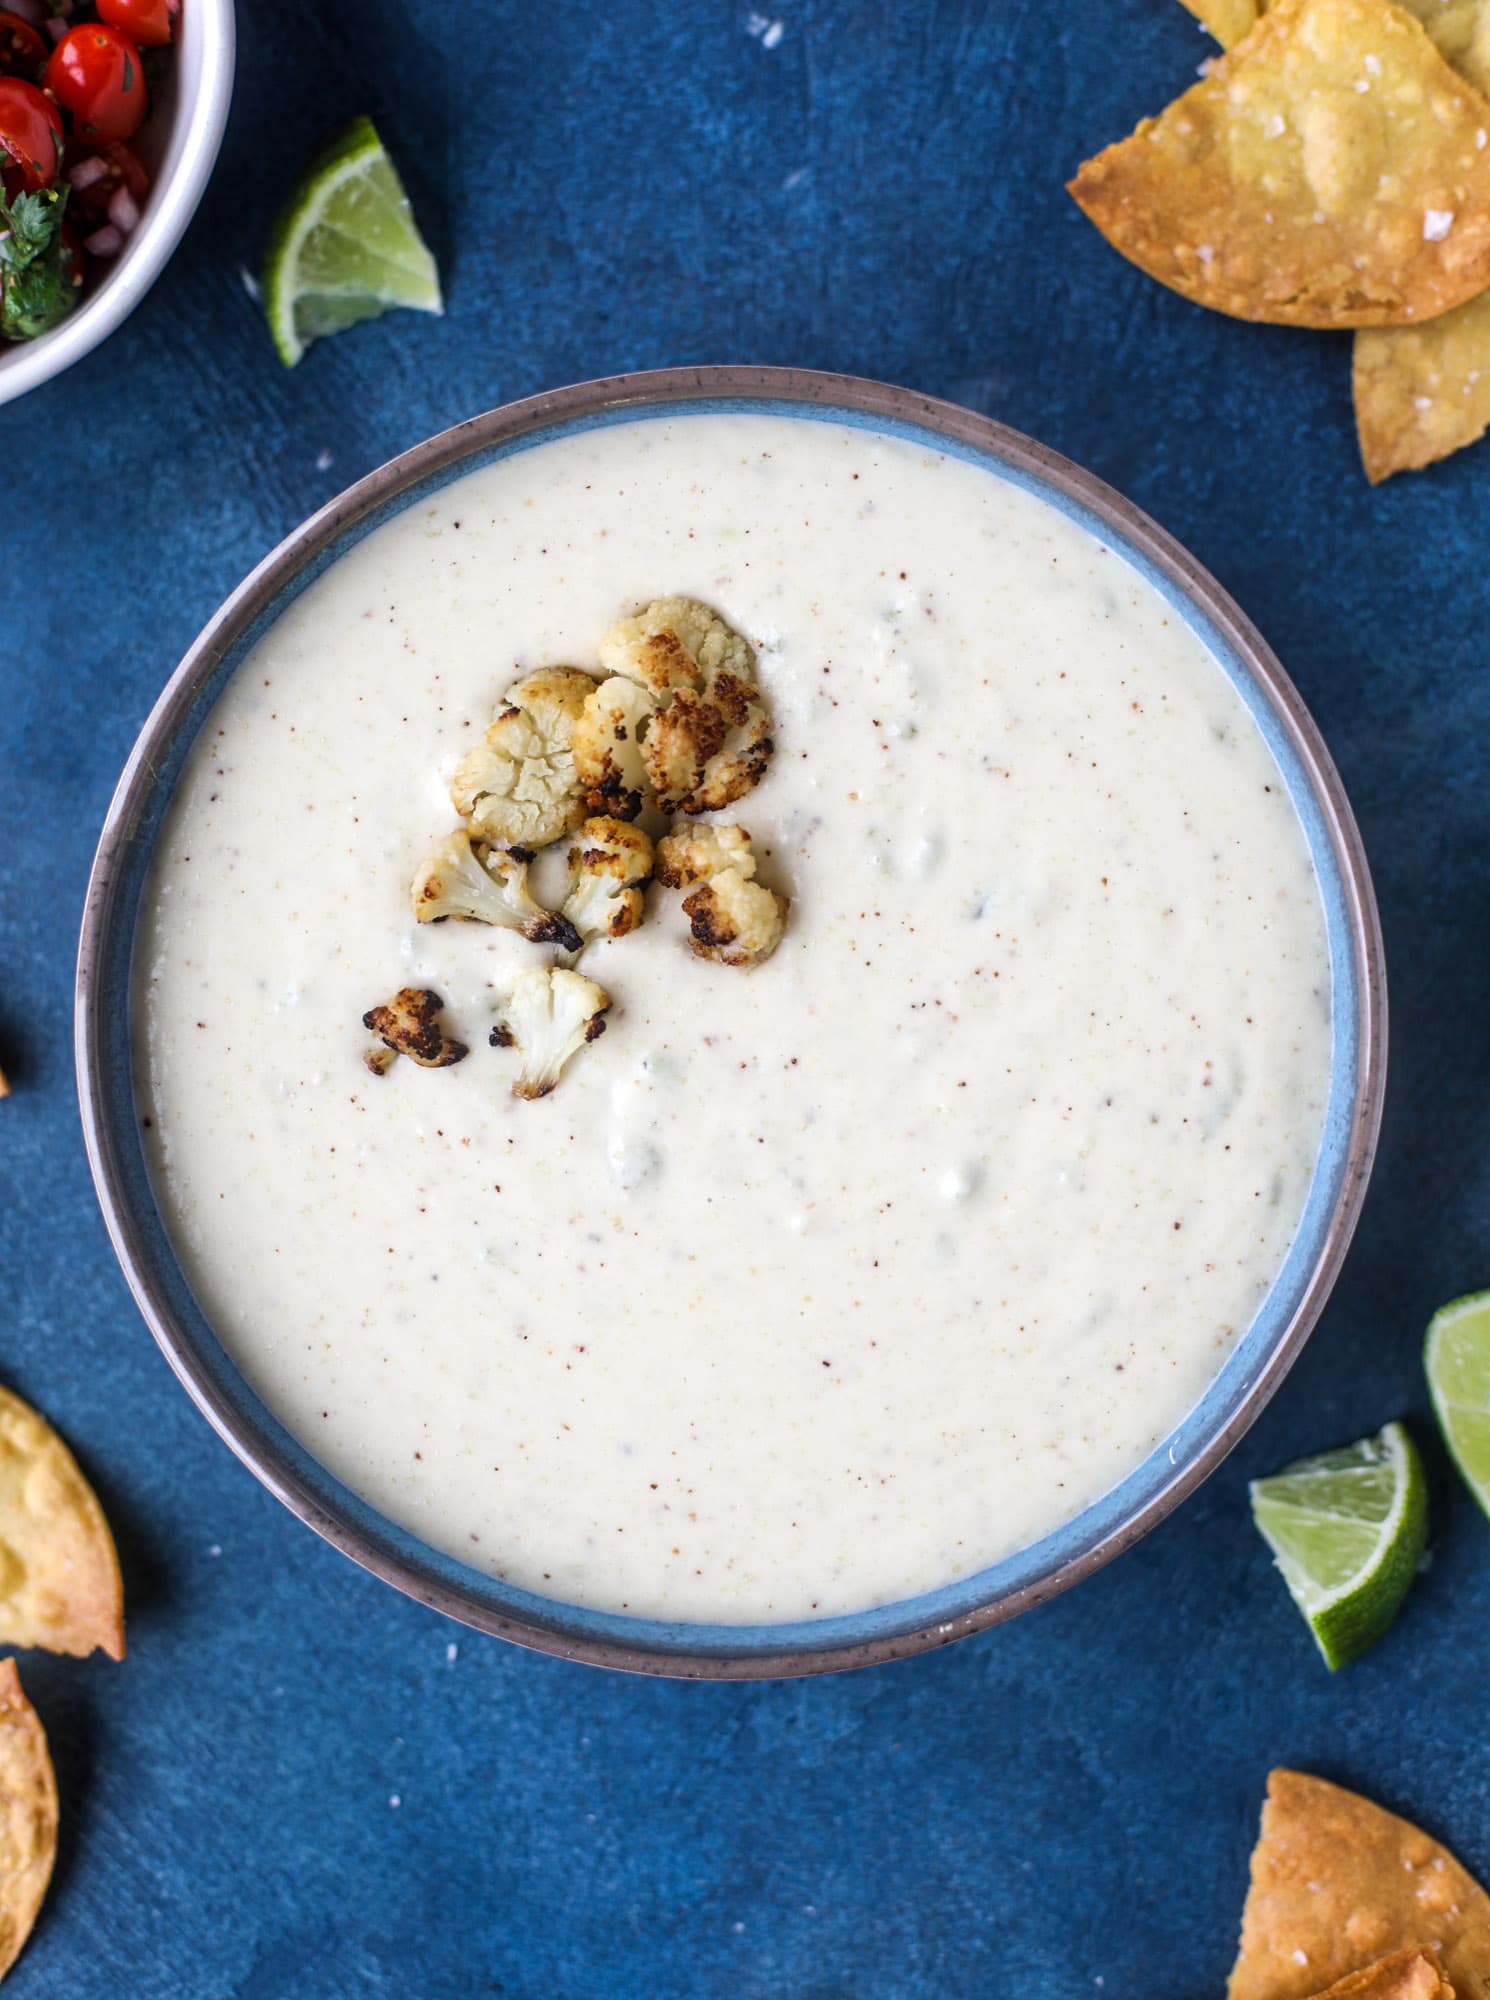 This roasted cauliflower queso has all the deliciousness of regular queso, with roasted cauliflower added in. It's satisfying and tastes like heaven. I howsweeteats.com #cauliflower #queso